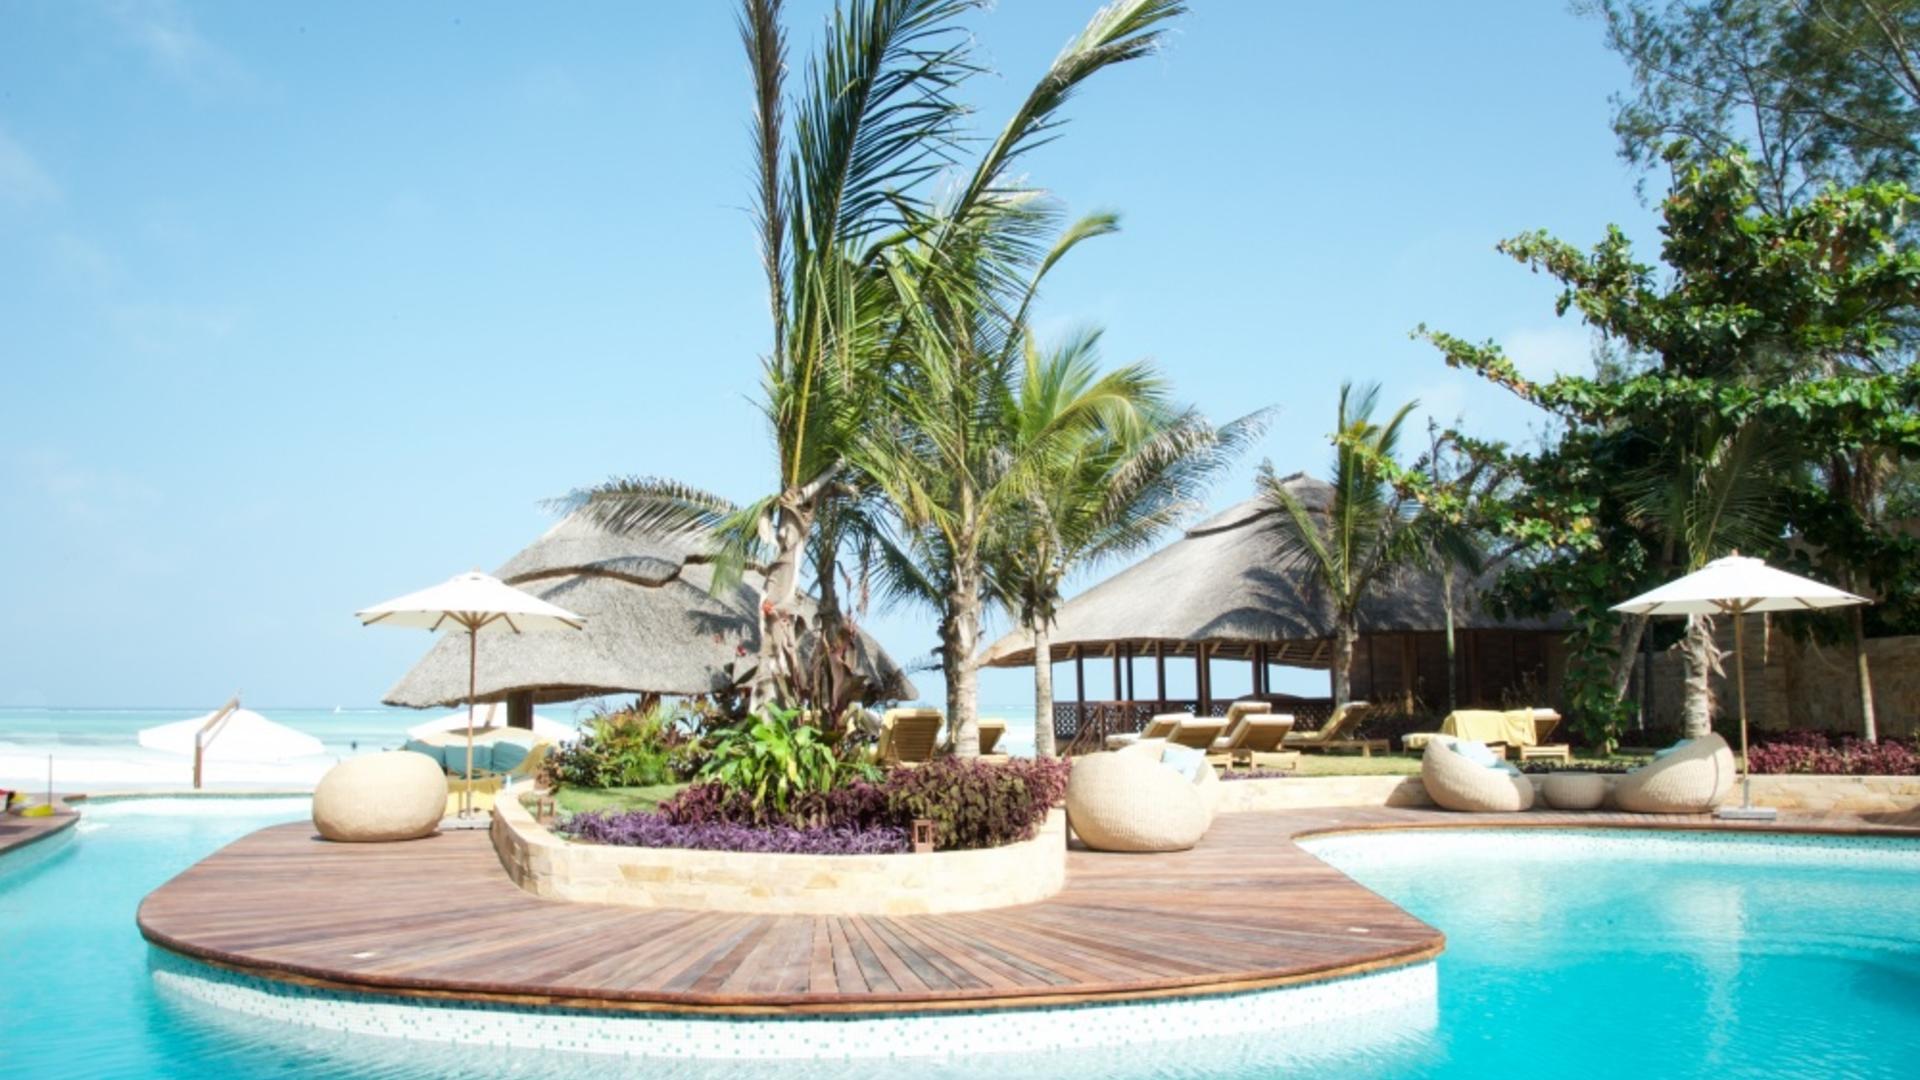 Top 10 Luxury Hotels with a Swimming Pool and Spa in Tanzania